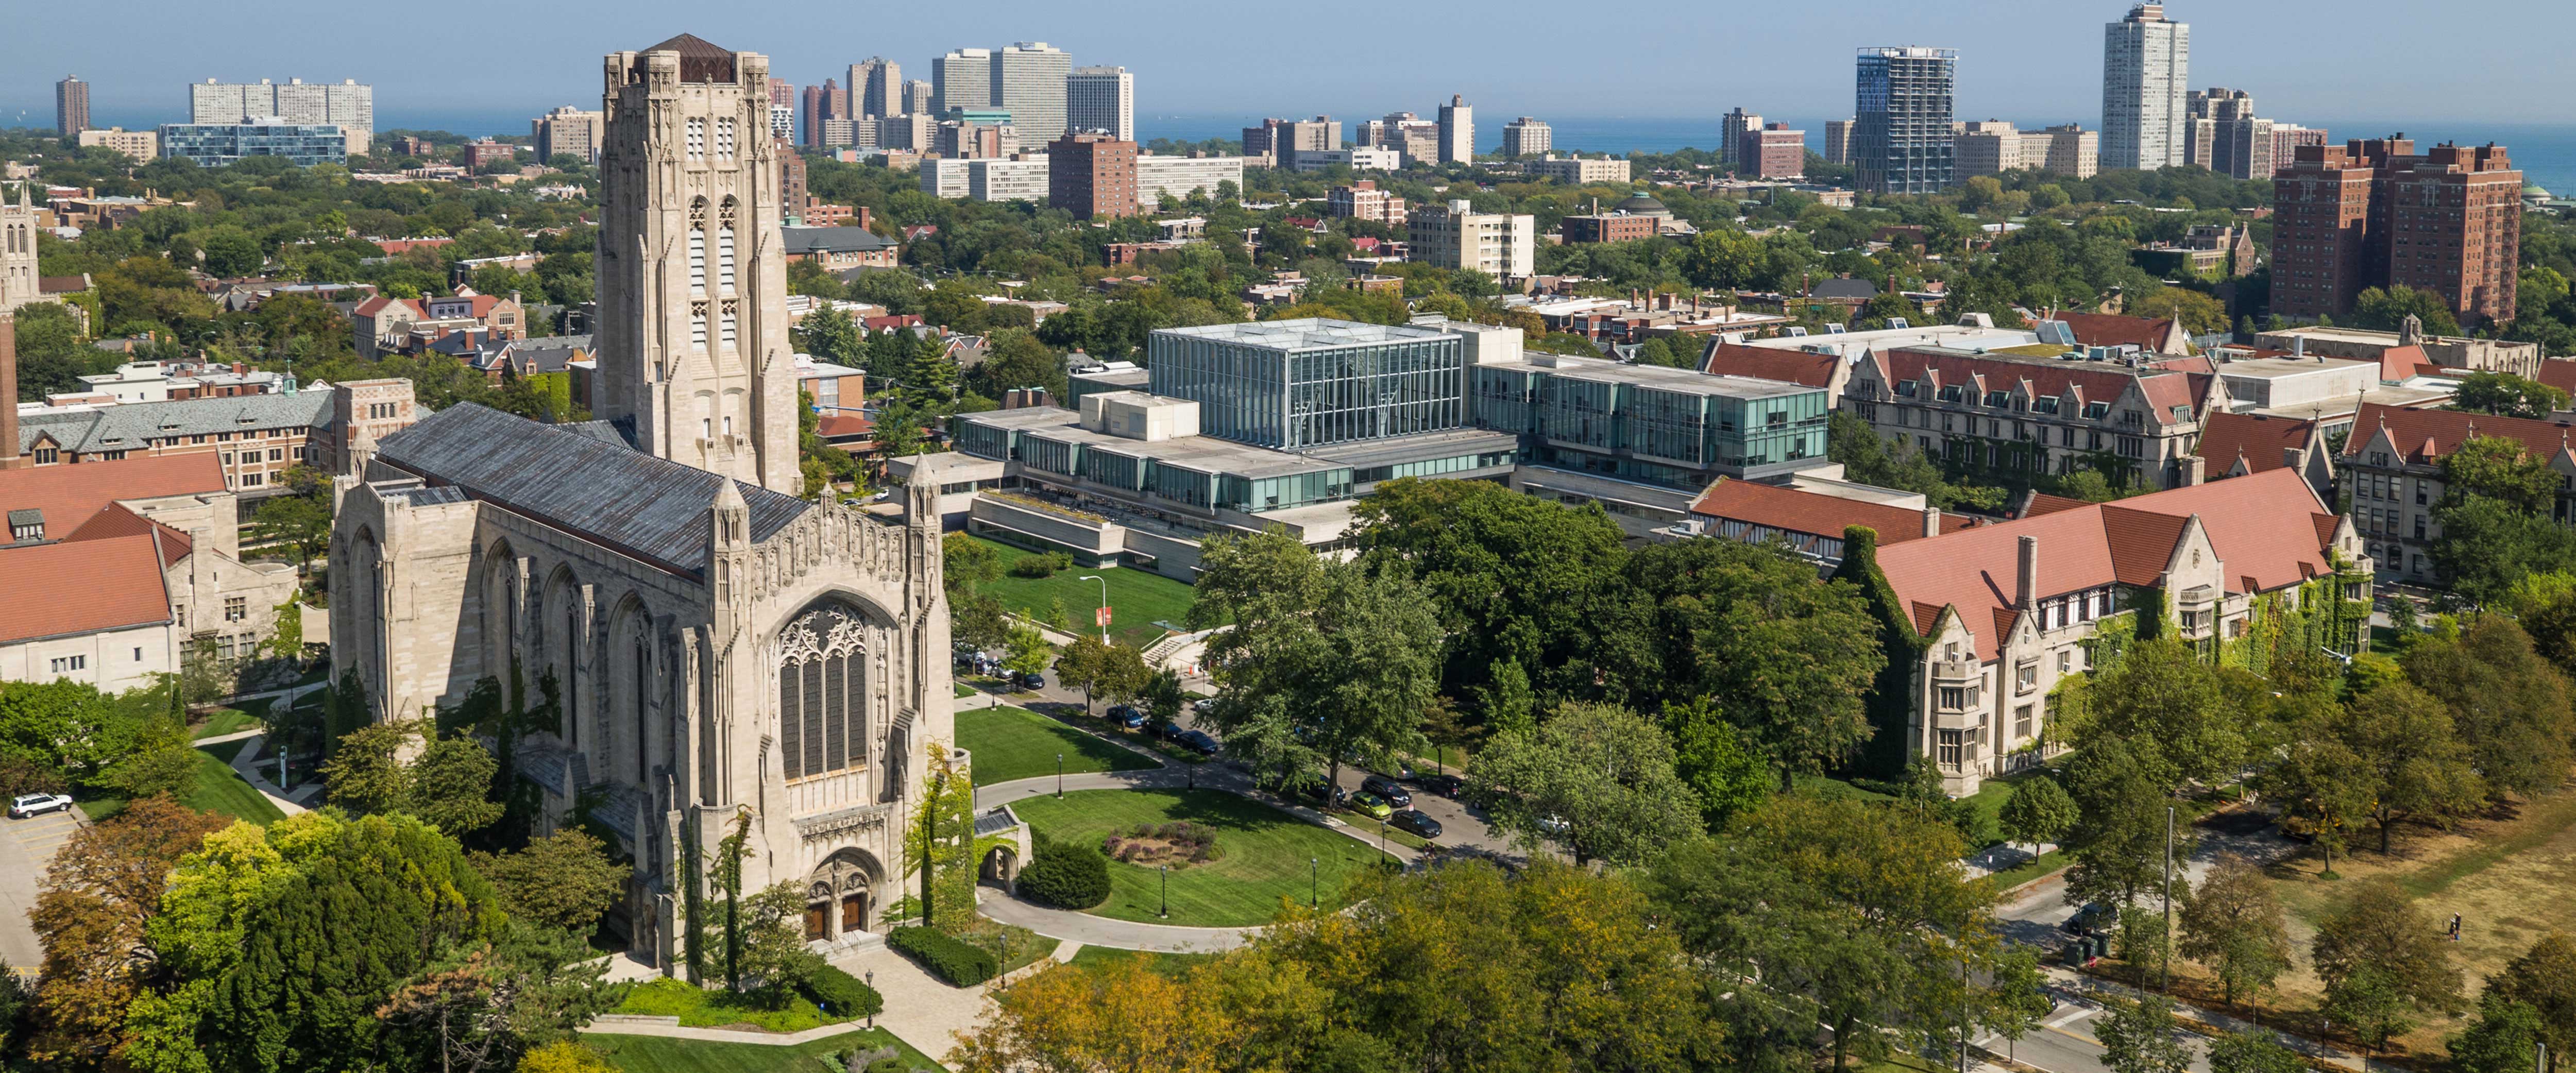 Chicago Booth Media Relations And Communications The University Of Chicago Booth School Of